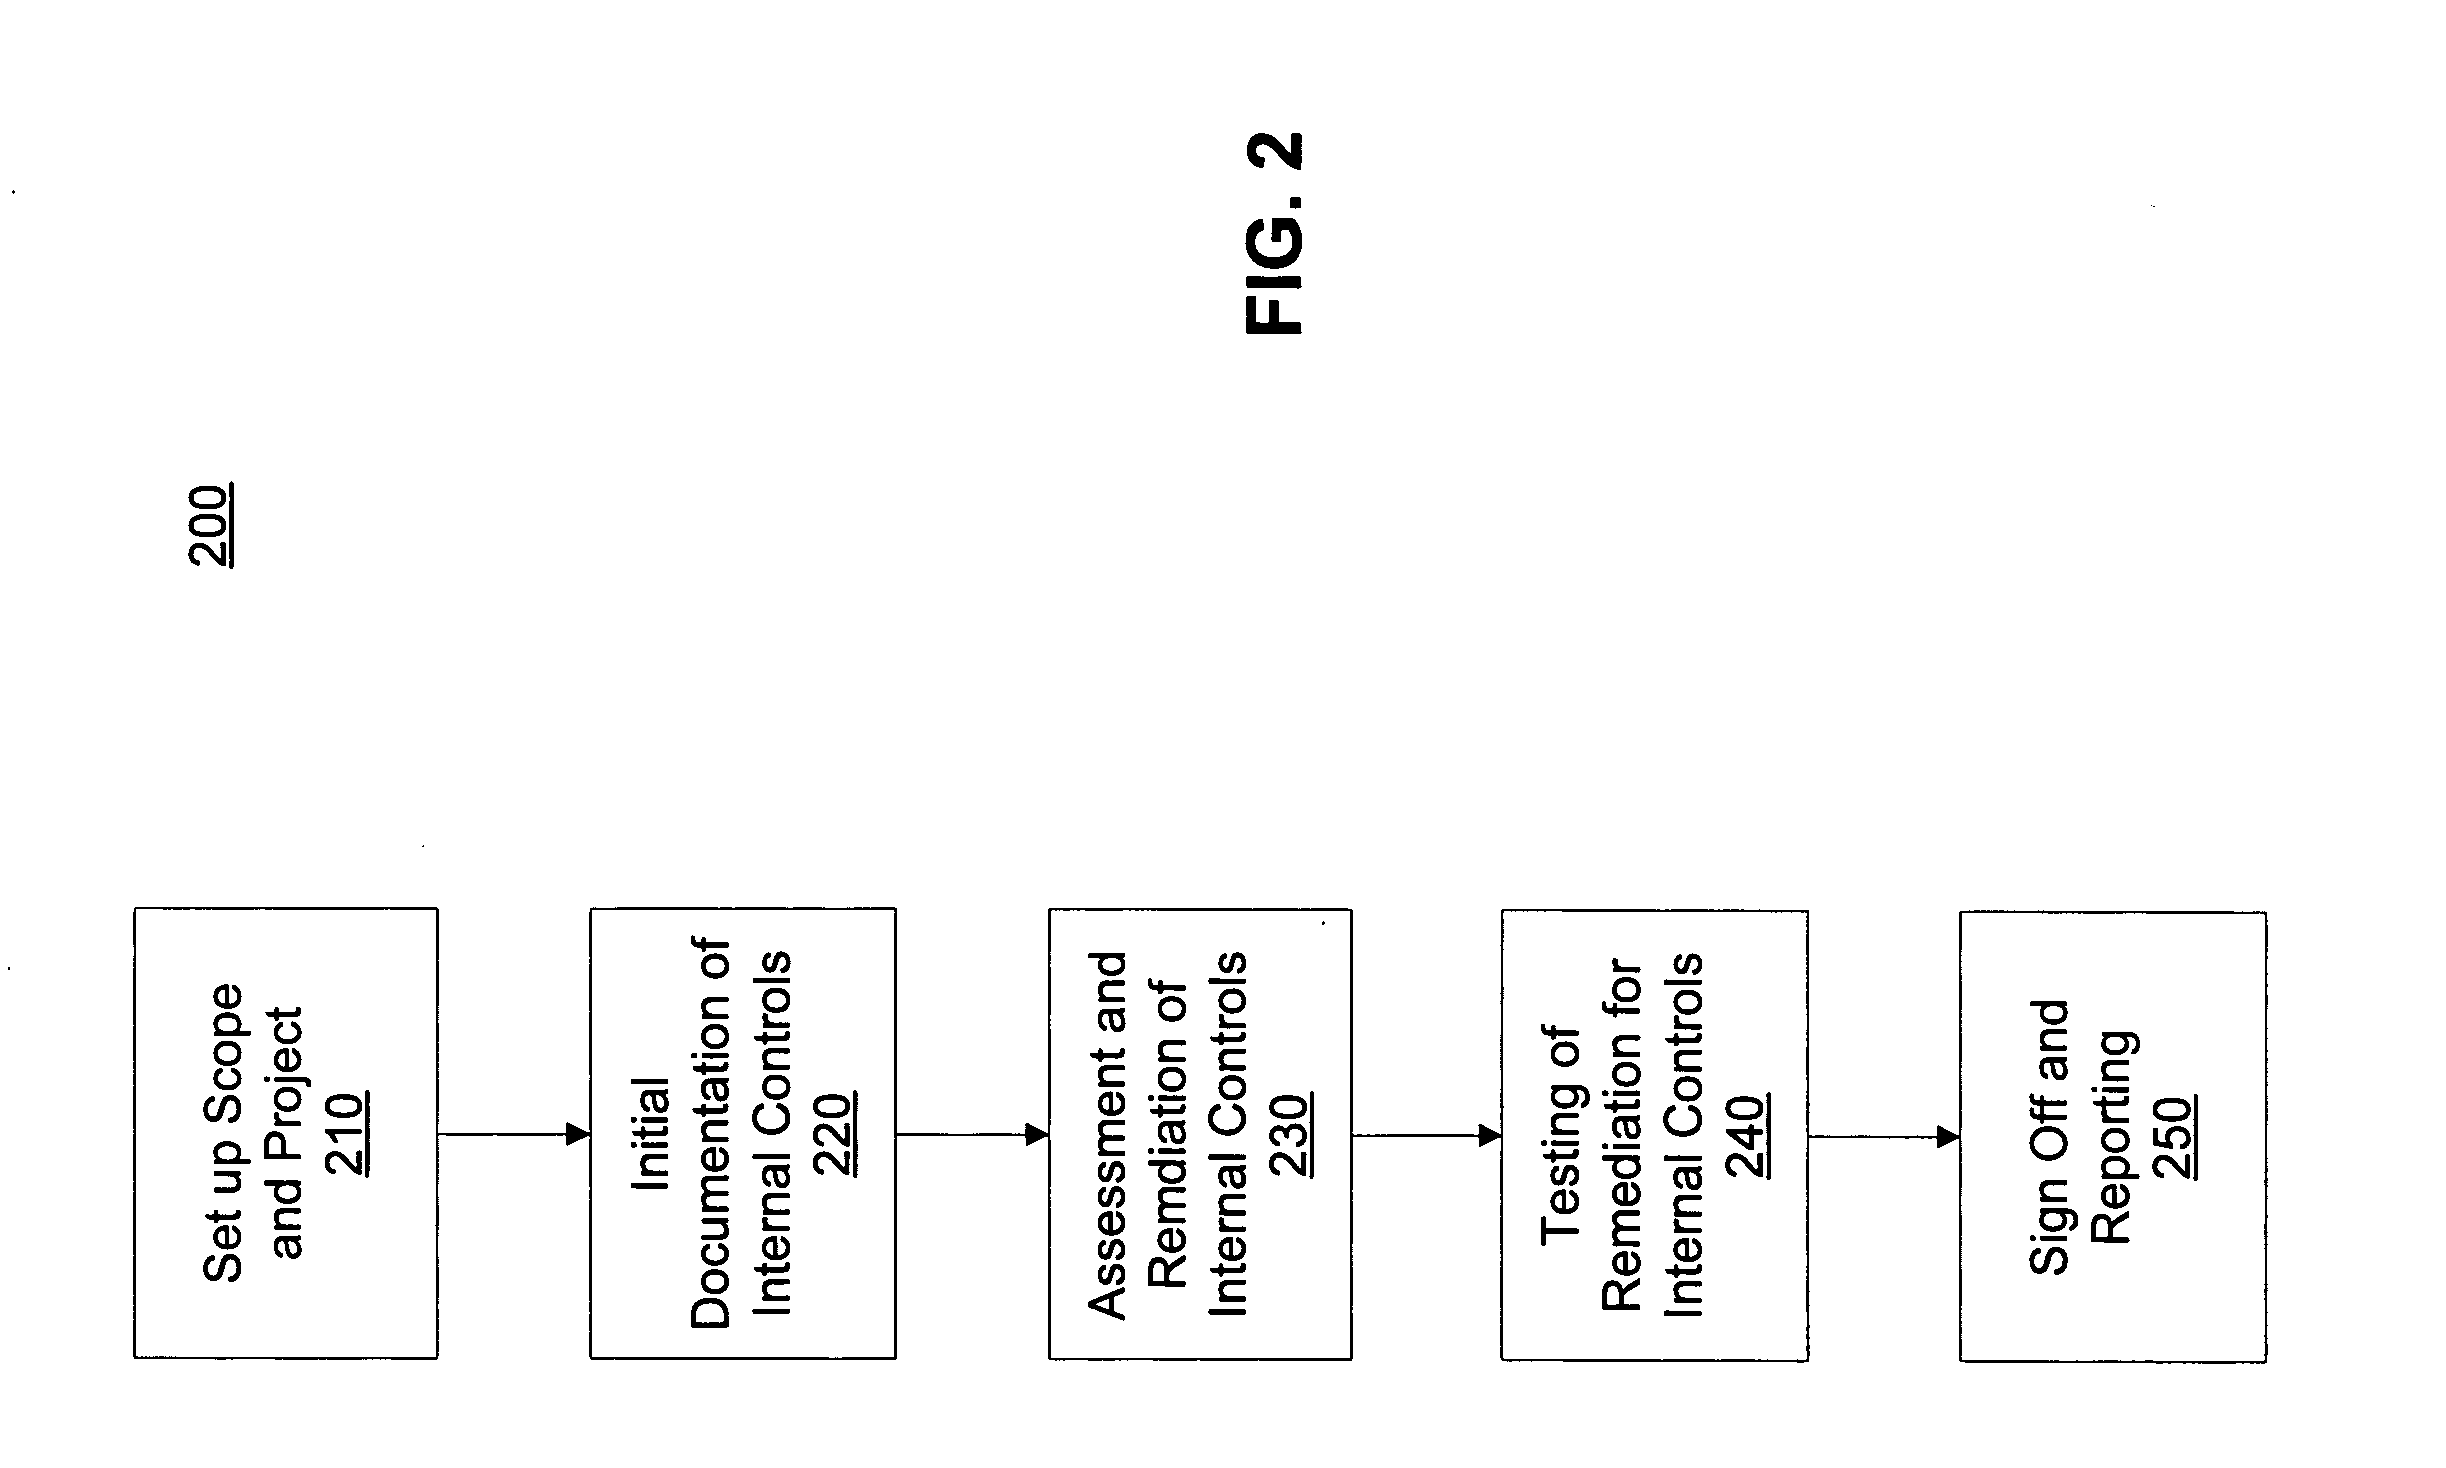 Systems and methods for assigning task-oriented roles to users